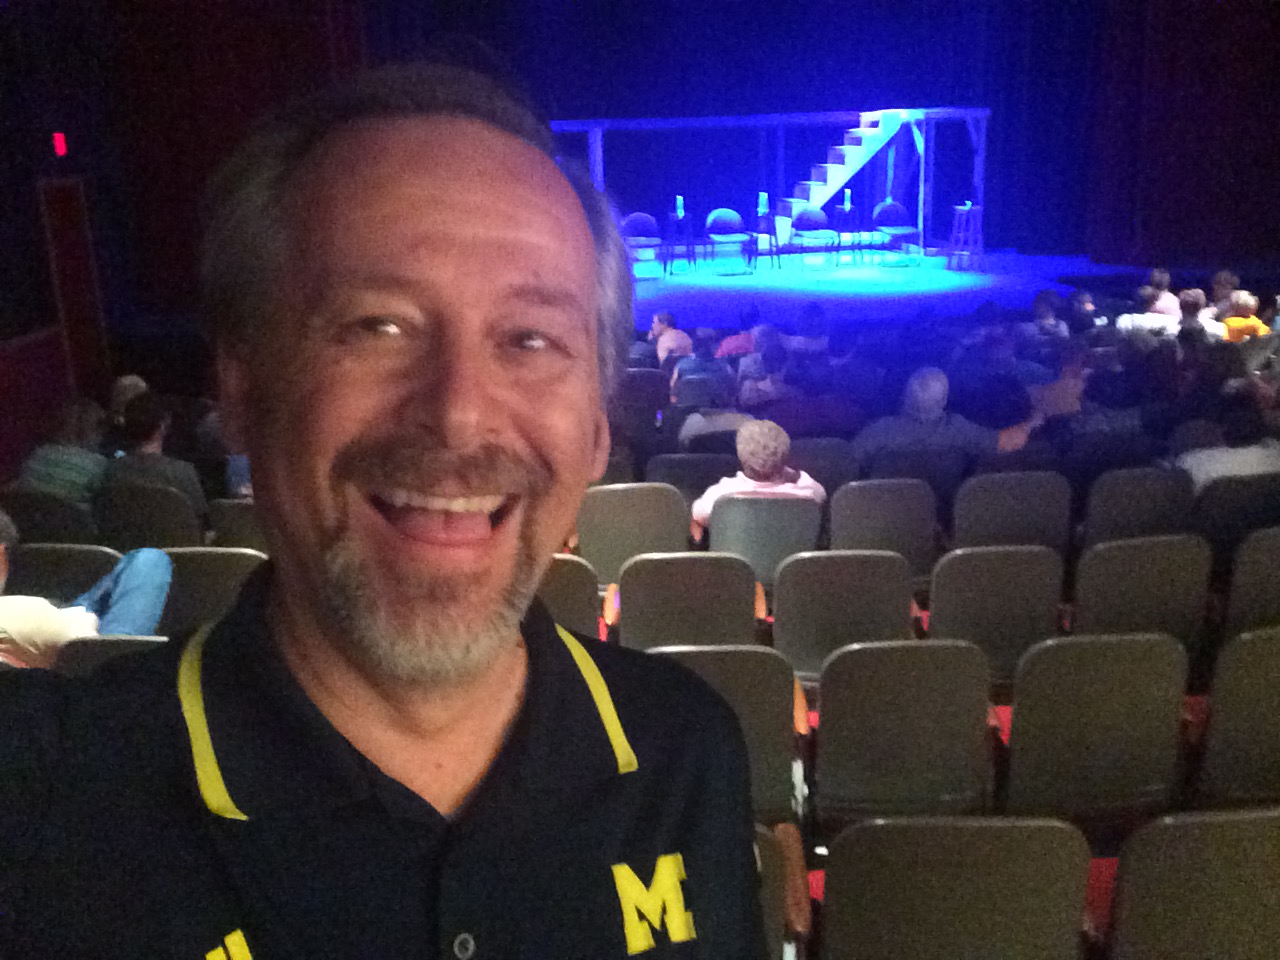 smiling man in theater with blue lit stage in background